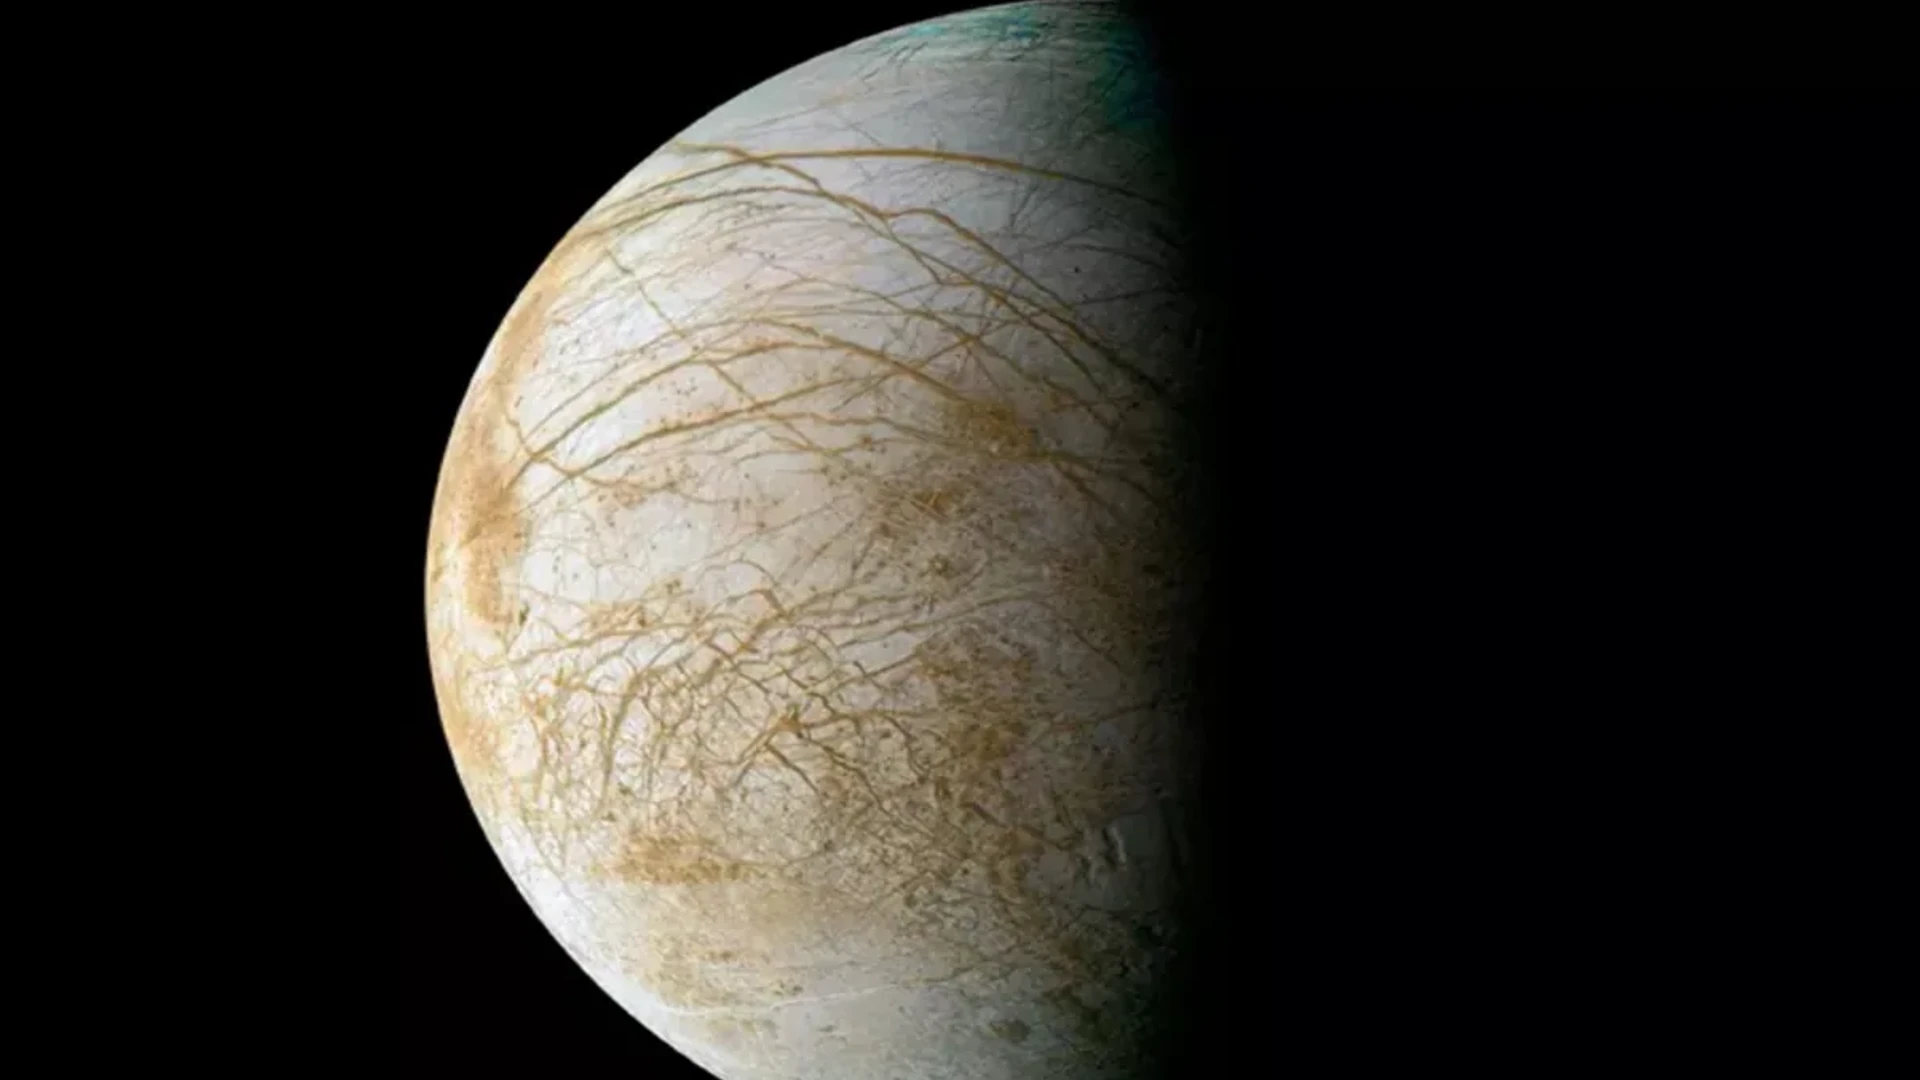 Europa, Jupiter’s Icy Moon May Have Extraterrestrial Life; New Study Hints Some And More